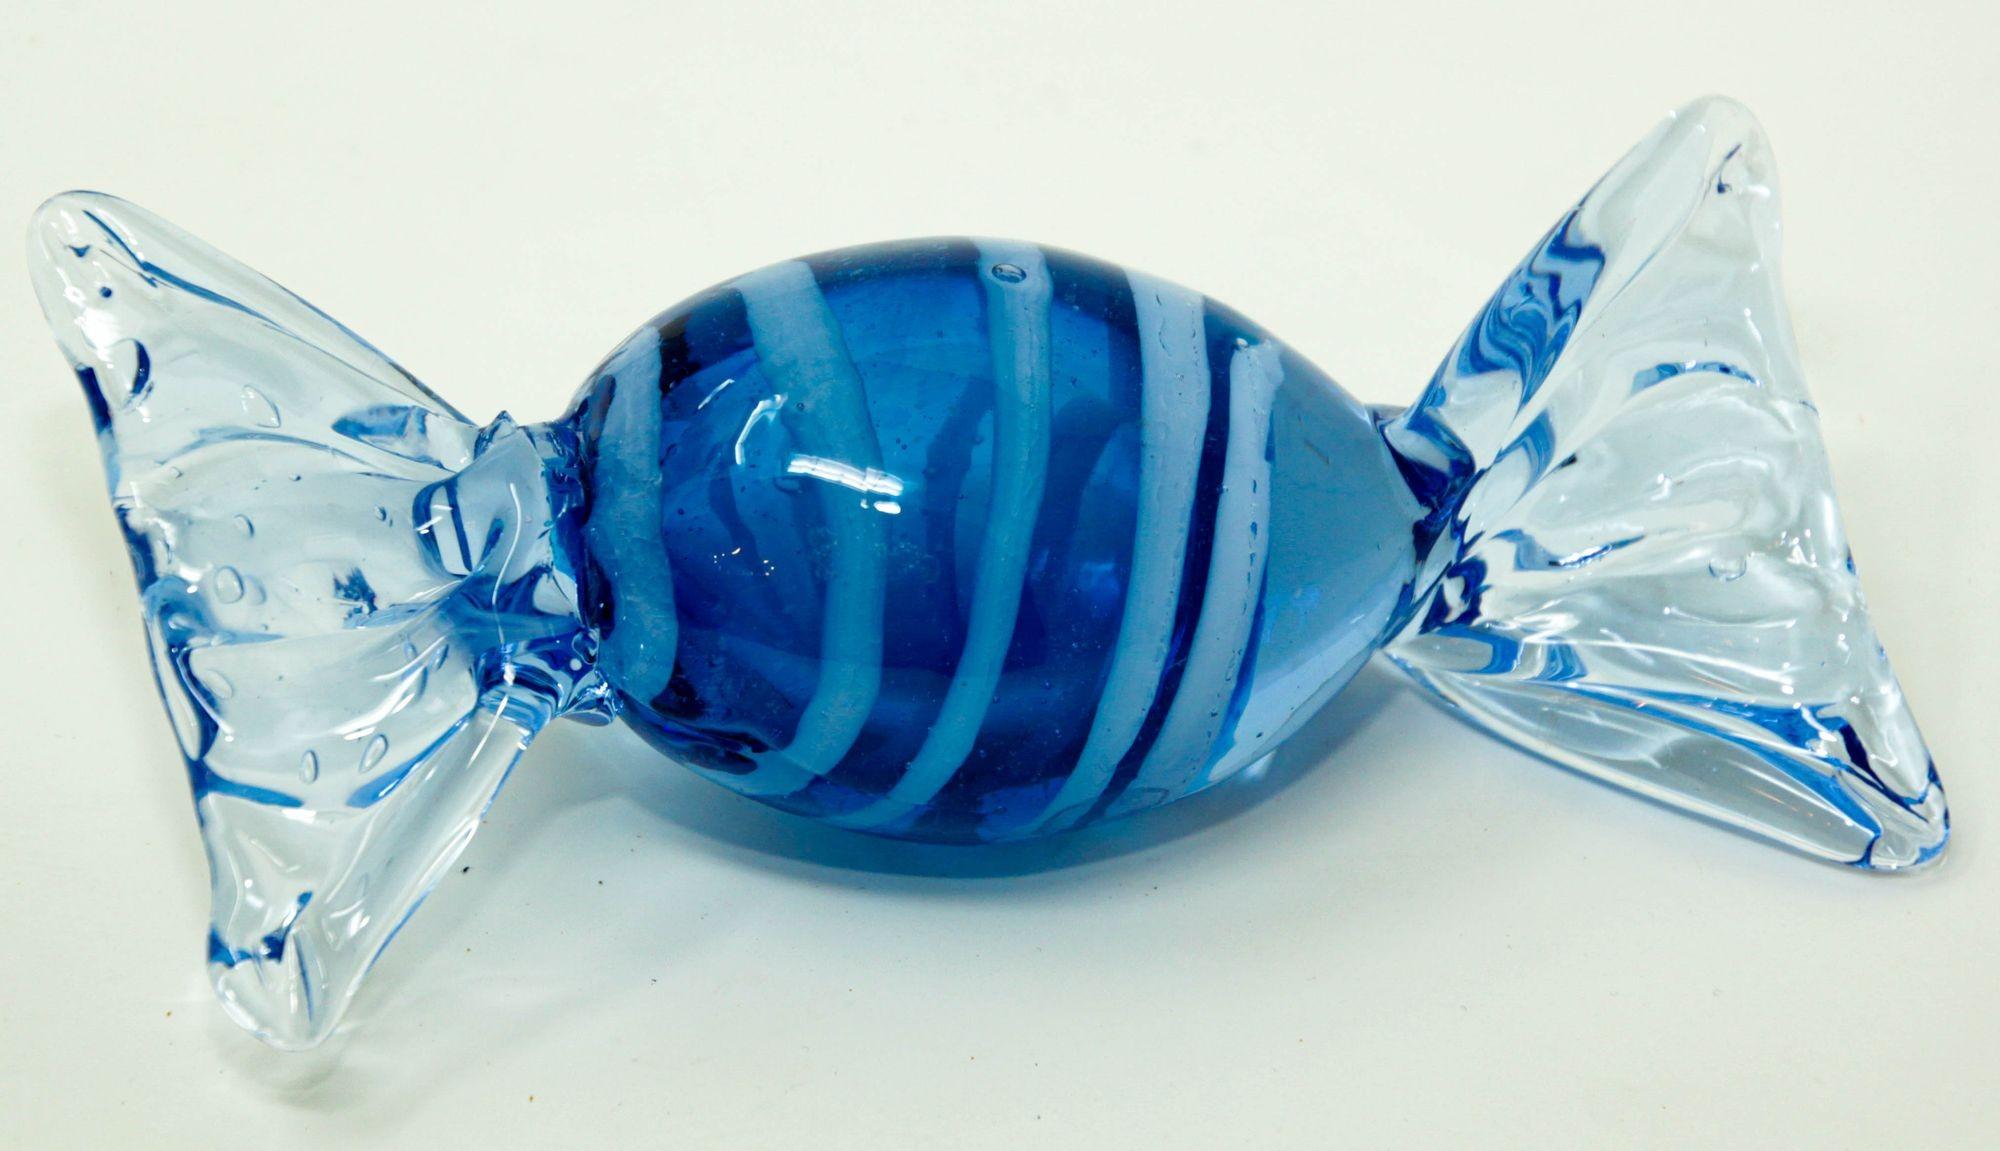 Vintage large Murano decorative blown glass wrapped blue hard candy paperweight.
Vintage oversized Murano blue blown glass candy sculpture of candy wrapped in cellophane is a piece of pop art.
This Italian Art Collectible Murano blown glass is large